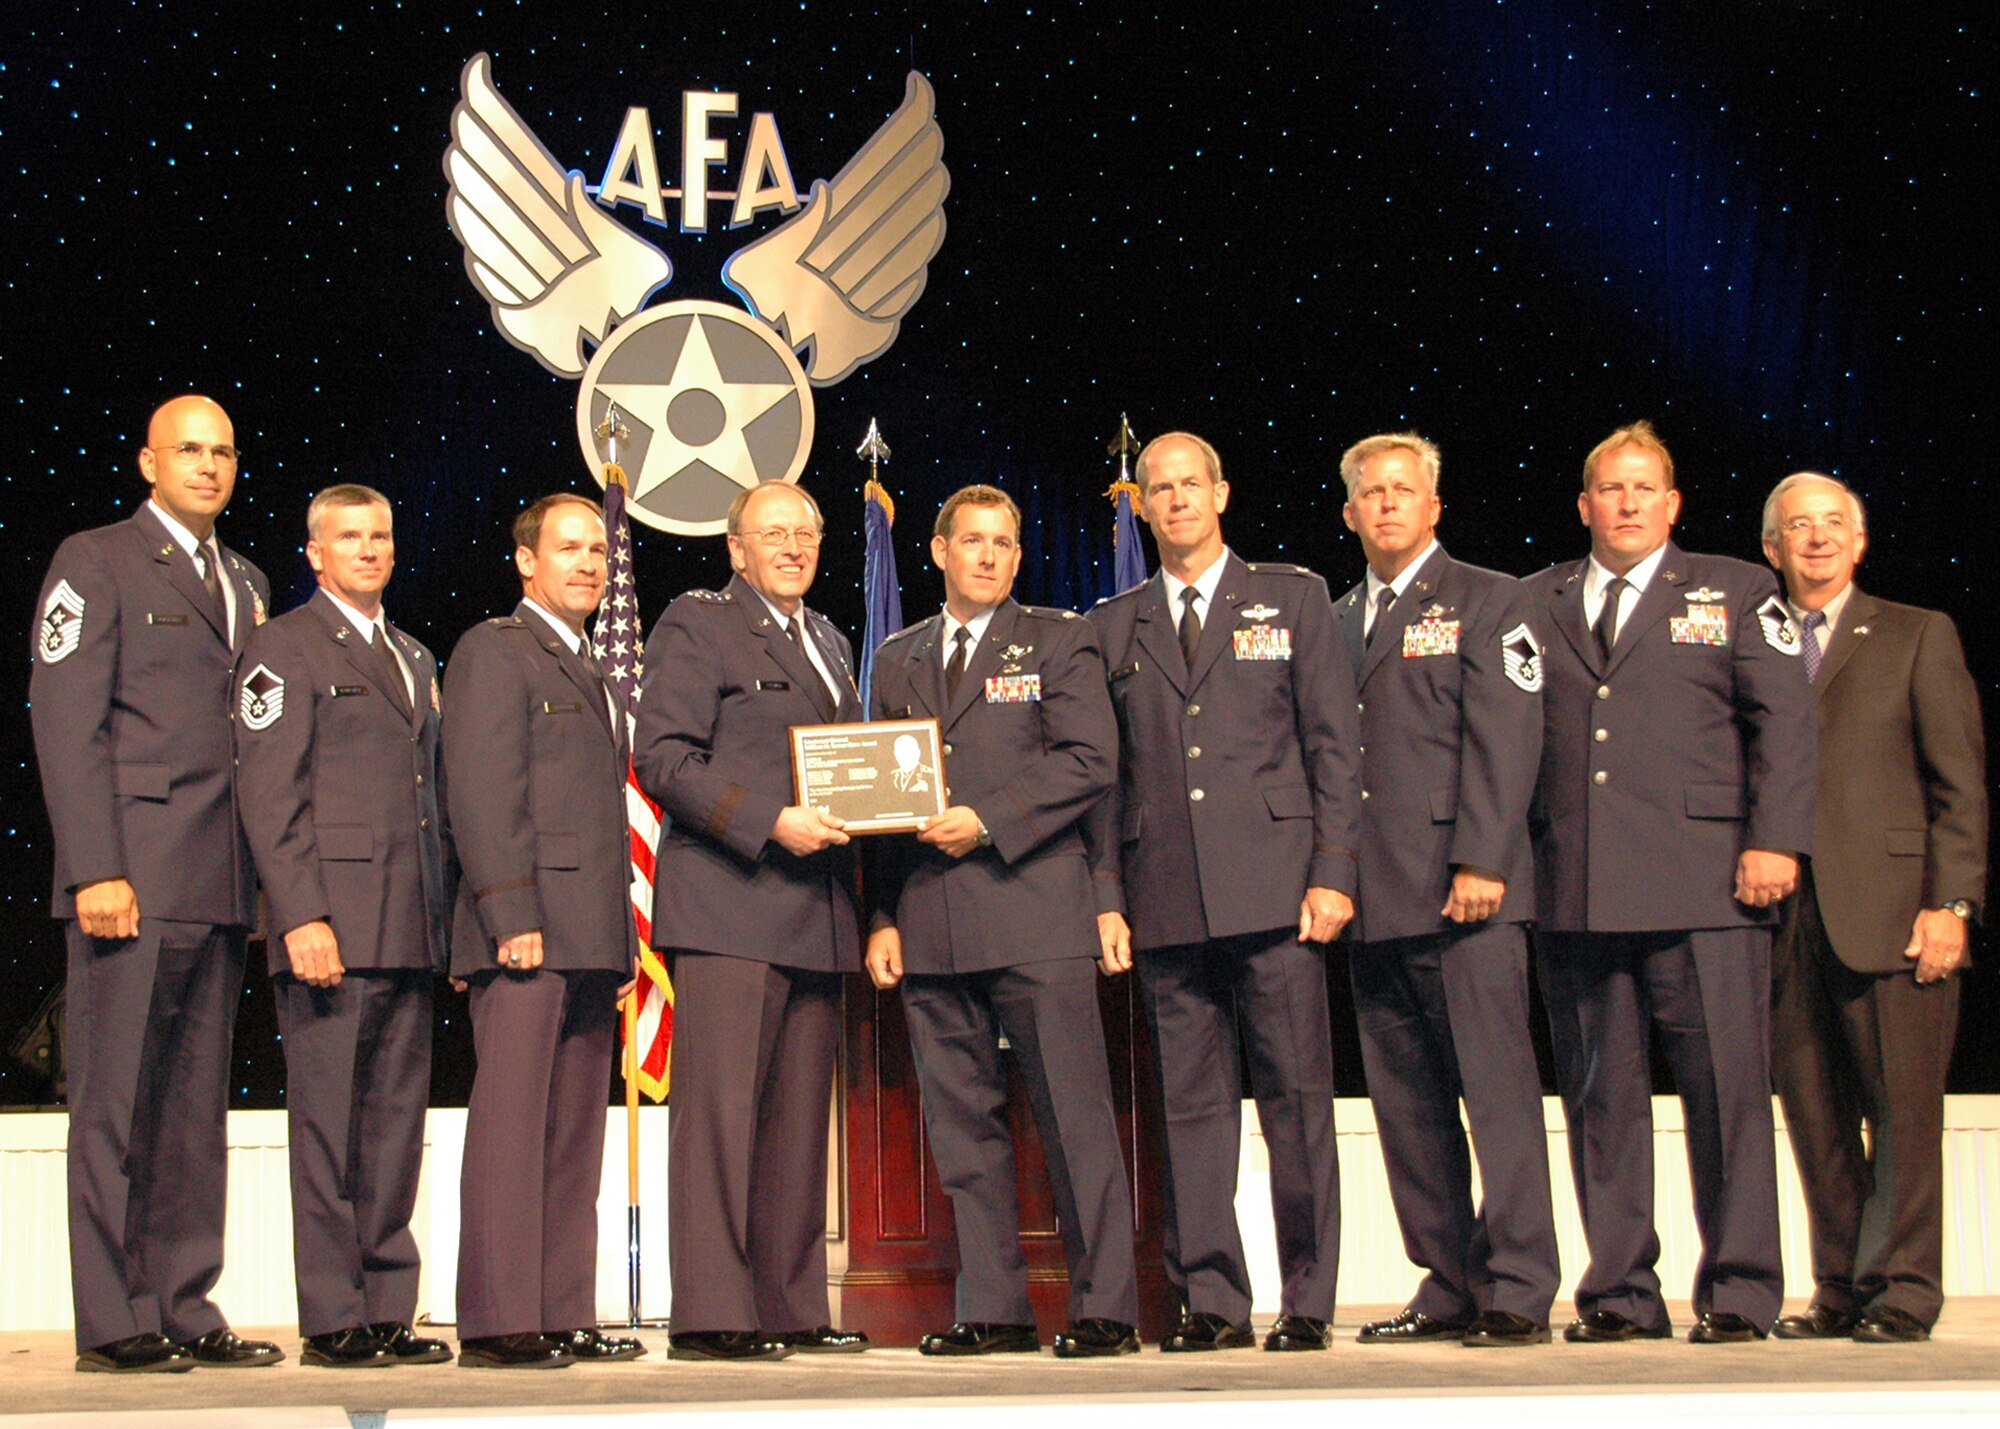 From left:  Chief Master Sgt. Michael Klausutis; Master Sgt. Bruce Callaway; Lt. Col. Timothy Broeking; Lt. Gen. Charles E. Stenner Jr., commander of the Air Force Reserve Command and chief of the Air Force Reserve; Lt. Cols. Daniel Flynn and Thomas Frazier; Senior Master Sgt. Thomas Haddock; Master Sgt. Kevin Woodward; and Joseph Sutter, Air Force Association chairman of the board, are shown at the annual AFA awards ceremony at National Harbor, Md. in September. General Stenner and Mr. Sutter joined the Duke Field reservist aircrew members on stage as they were presented the AFA's 2009 Lt. Gen. William H. Tunner award for the Air Force's most outstanding airlift aircrew .  Crew members not shown:  Lt. Col. Steven Jensen and Capt. Miriam Williams. (U.S. Air Force photo/Dan Neely)